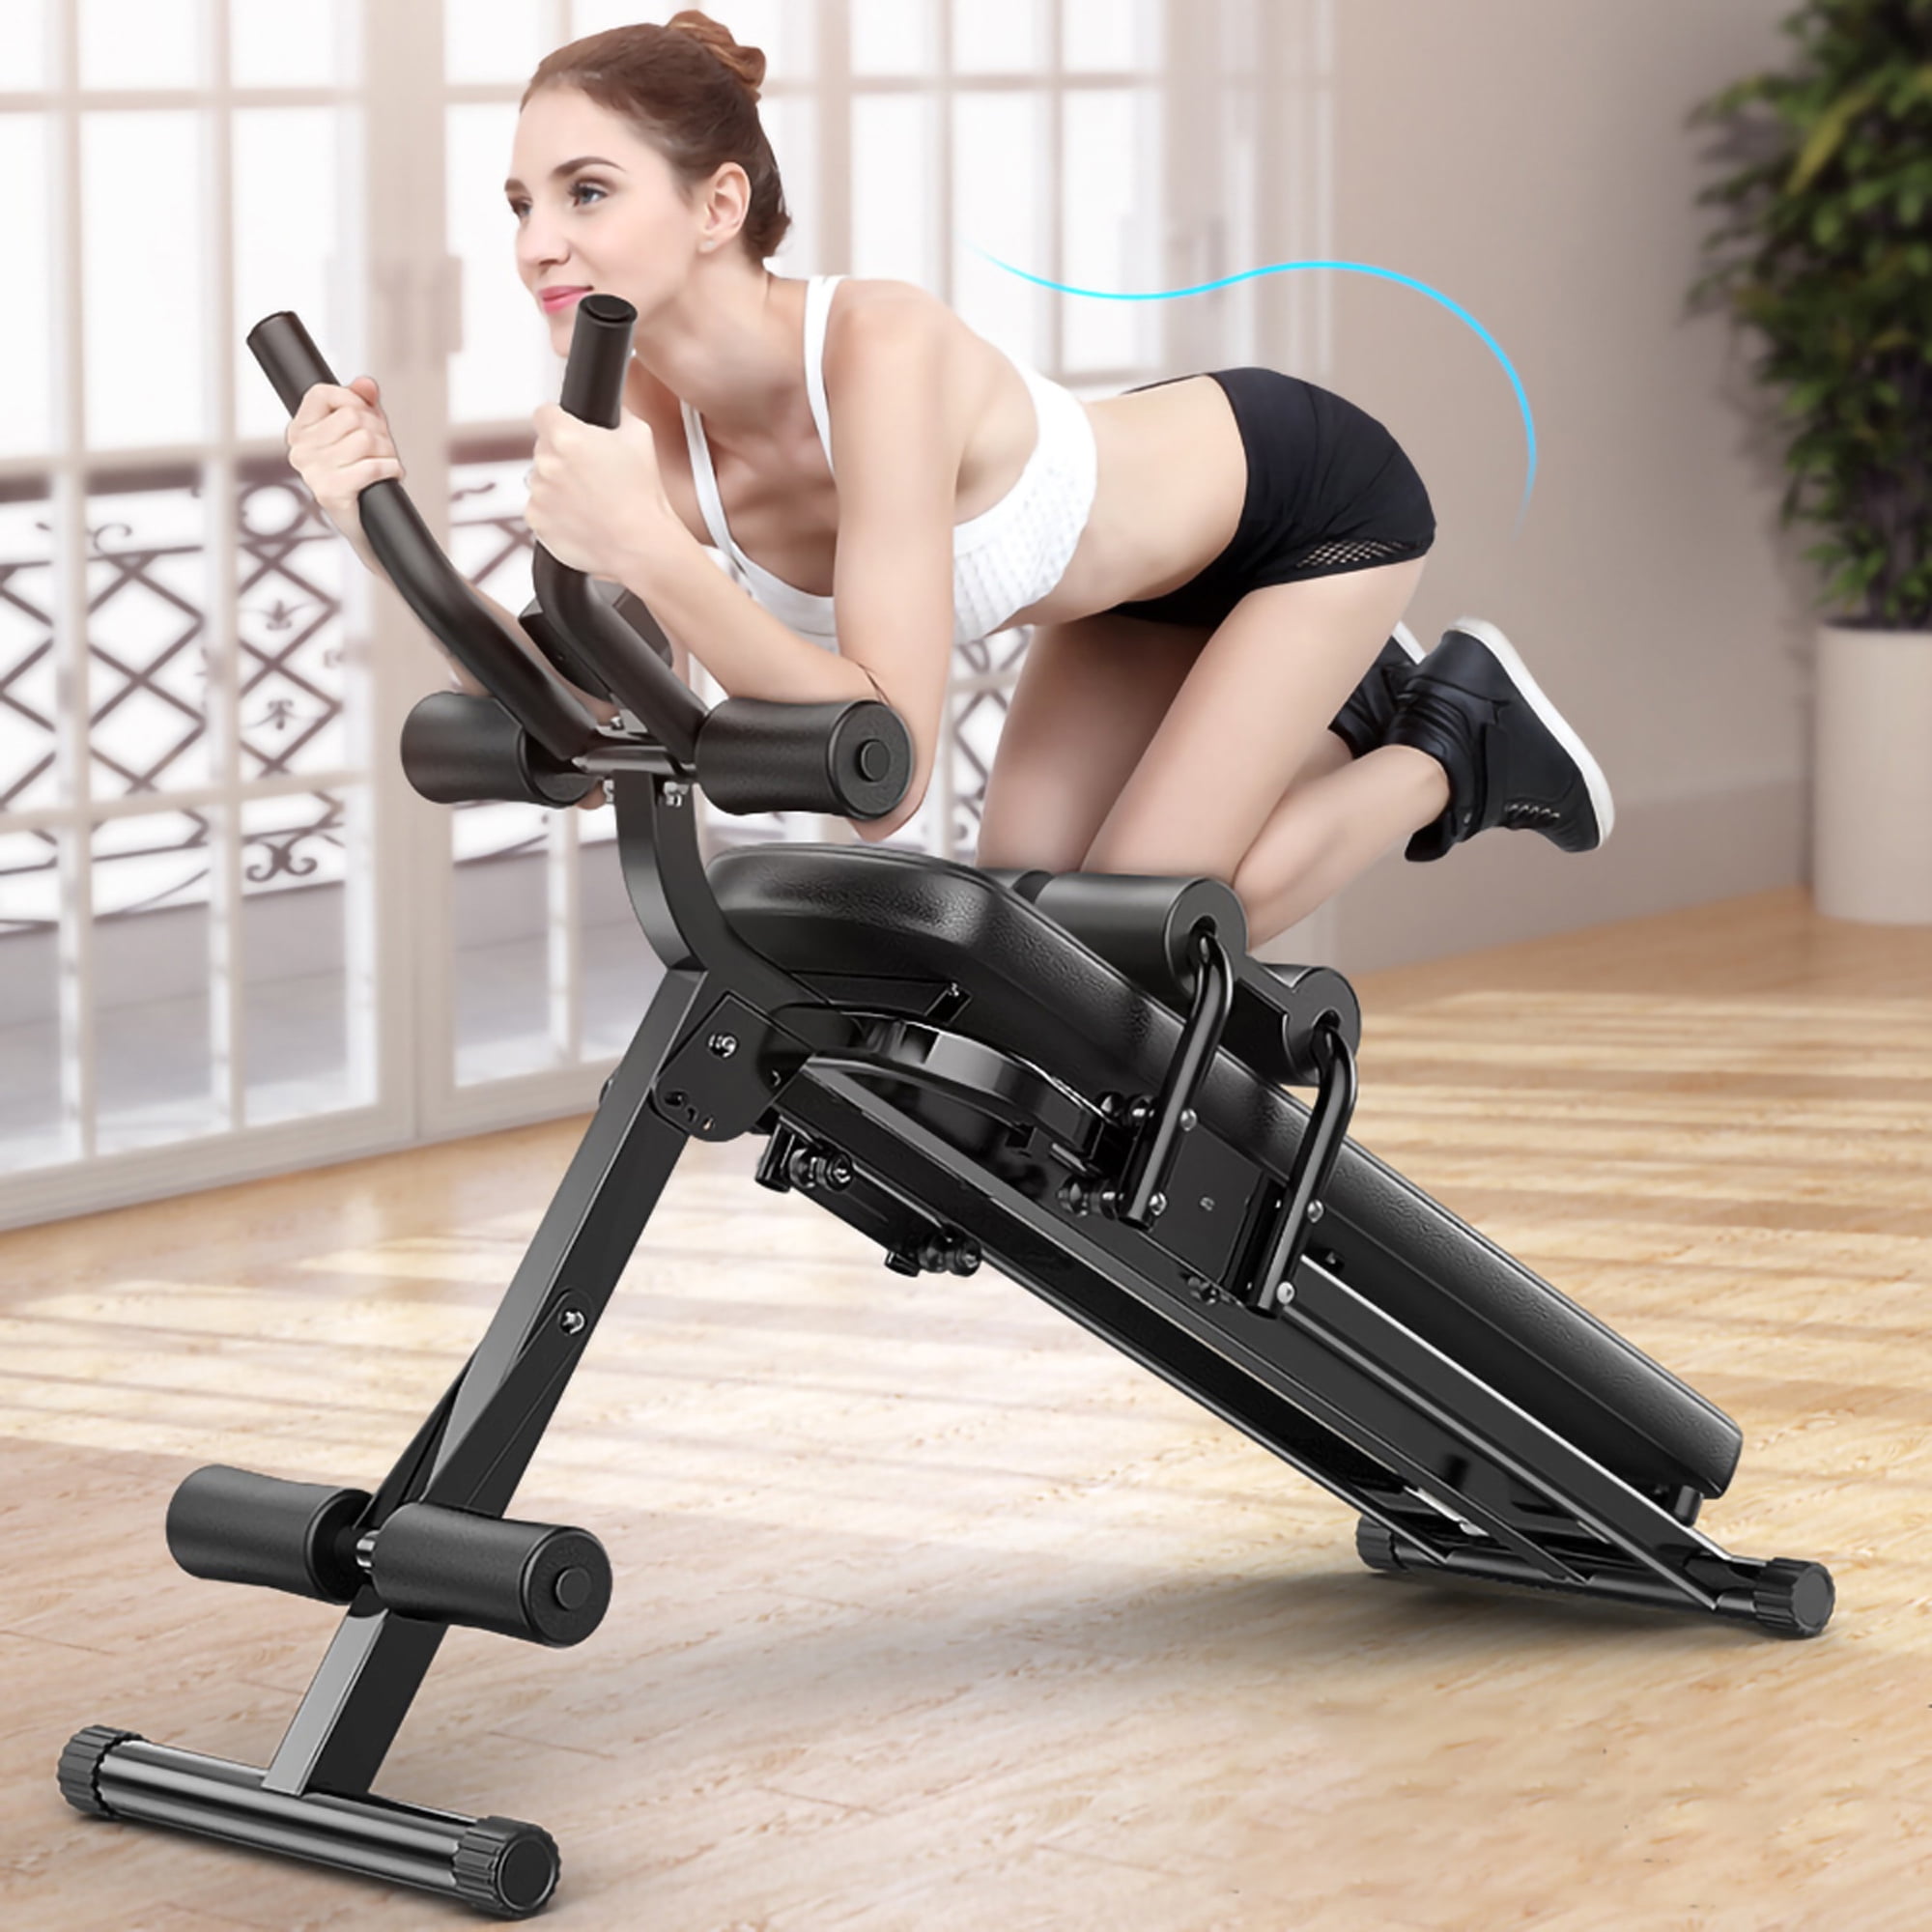 Ab Roller Abdominal Machine Exercise Sit Up Fitness Crunch Home Gym Fitness USA 